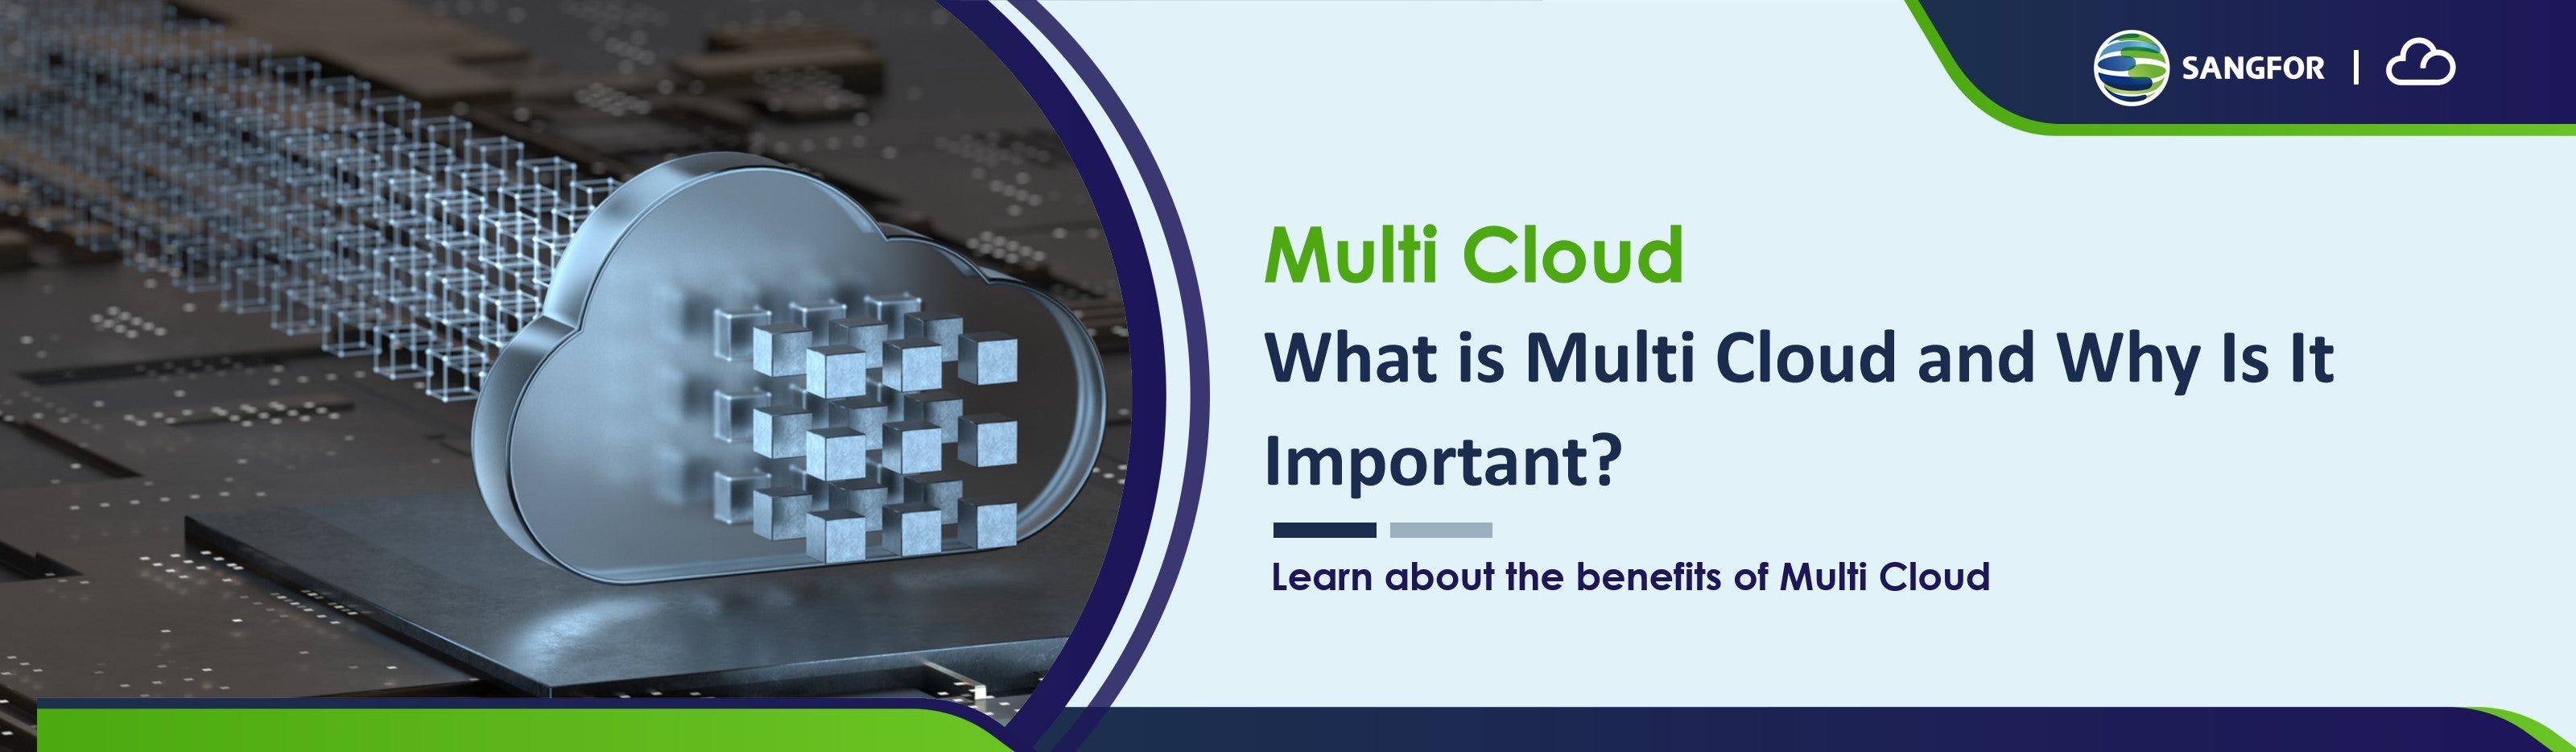 What is multi cloud and why is it important article